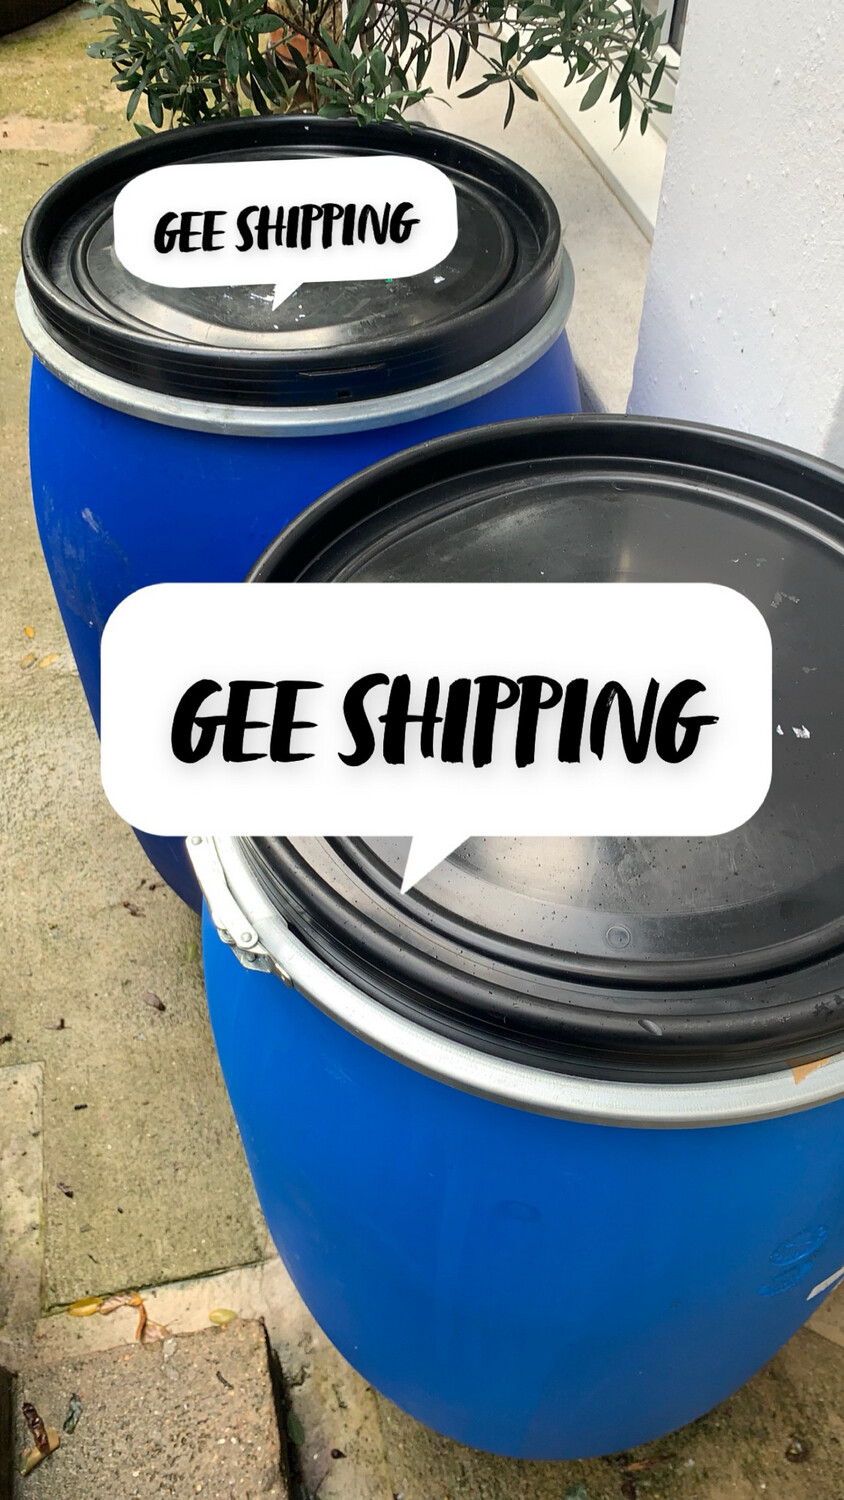 Buy and Ship 🚢 2) USED 220 Lt Plastic Barrels Antigua🇦🇬Barbados🇧🇧 Dominica🇩🇲Grenada🇬🇩Guyana🇬🇾 Jamaica Kingston🇯🇲Kitts and Nice🇰🇳 St Lucia🇱🇨St. Vincent🇻🇨Trinidad And Tobago 🇹🇹.